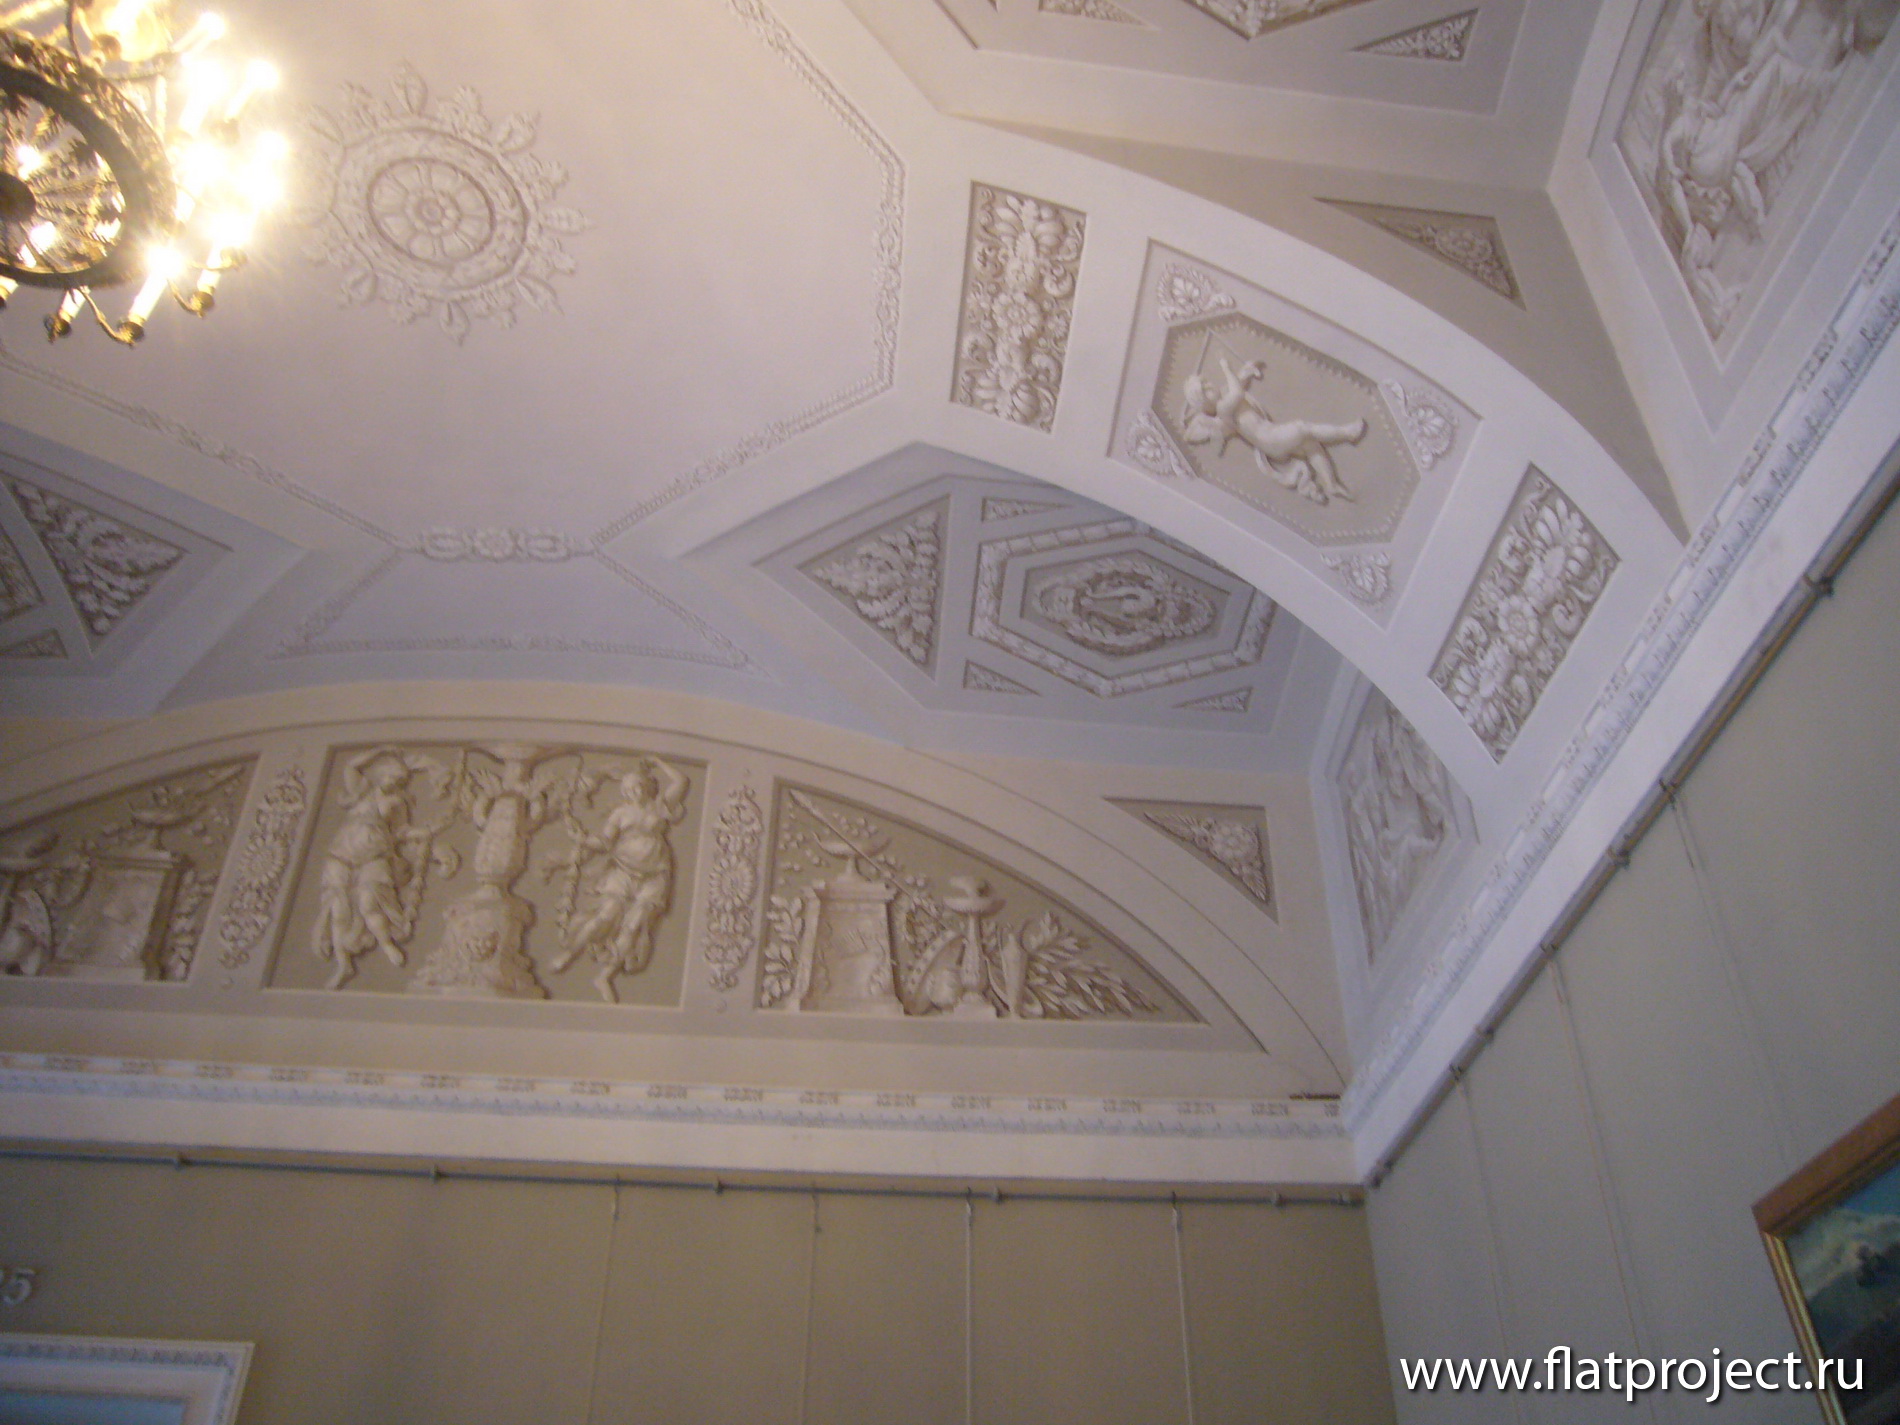 The State Russian museum interiors – photo 130